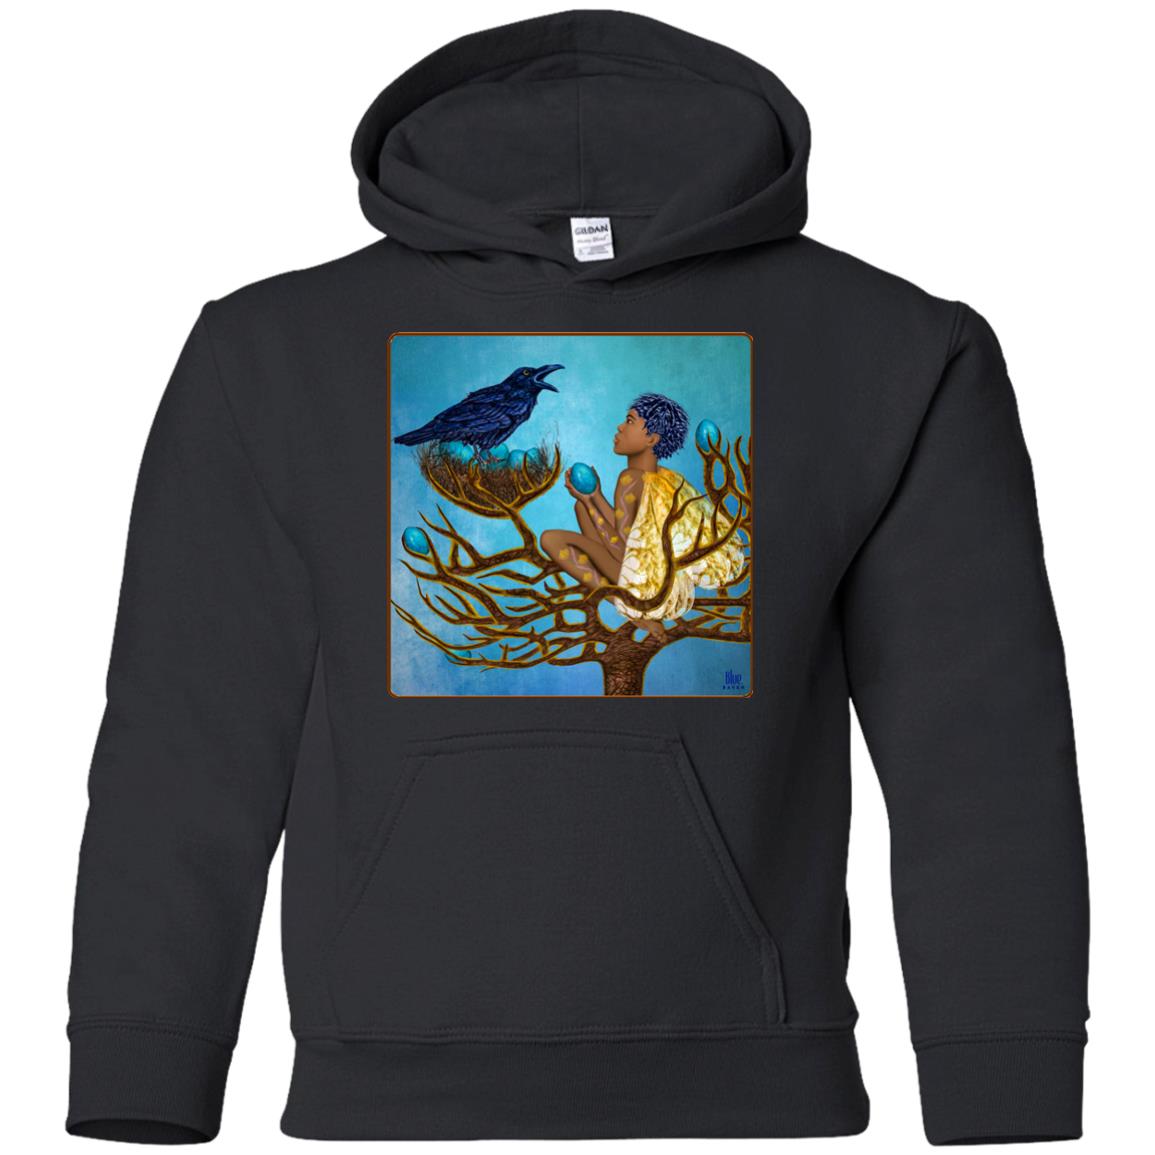 The blue raven's friend - Youth Hoodie